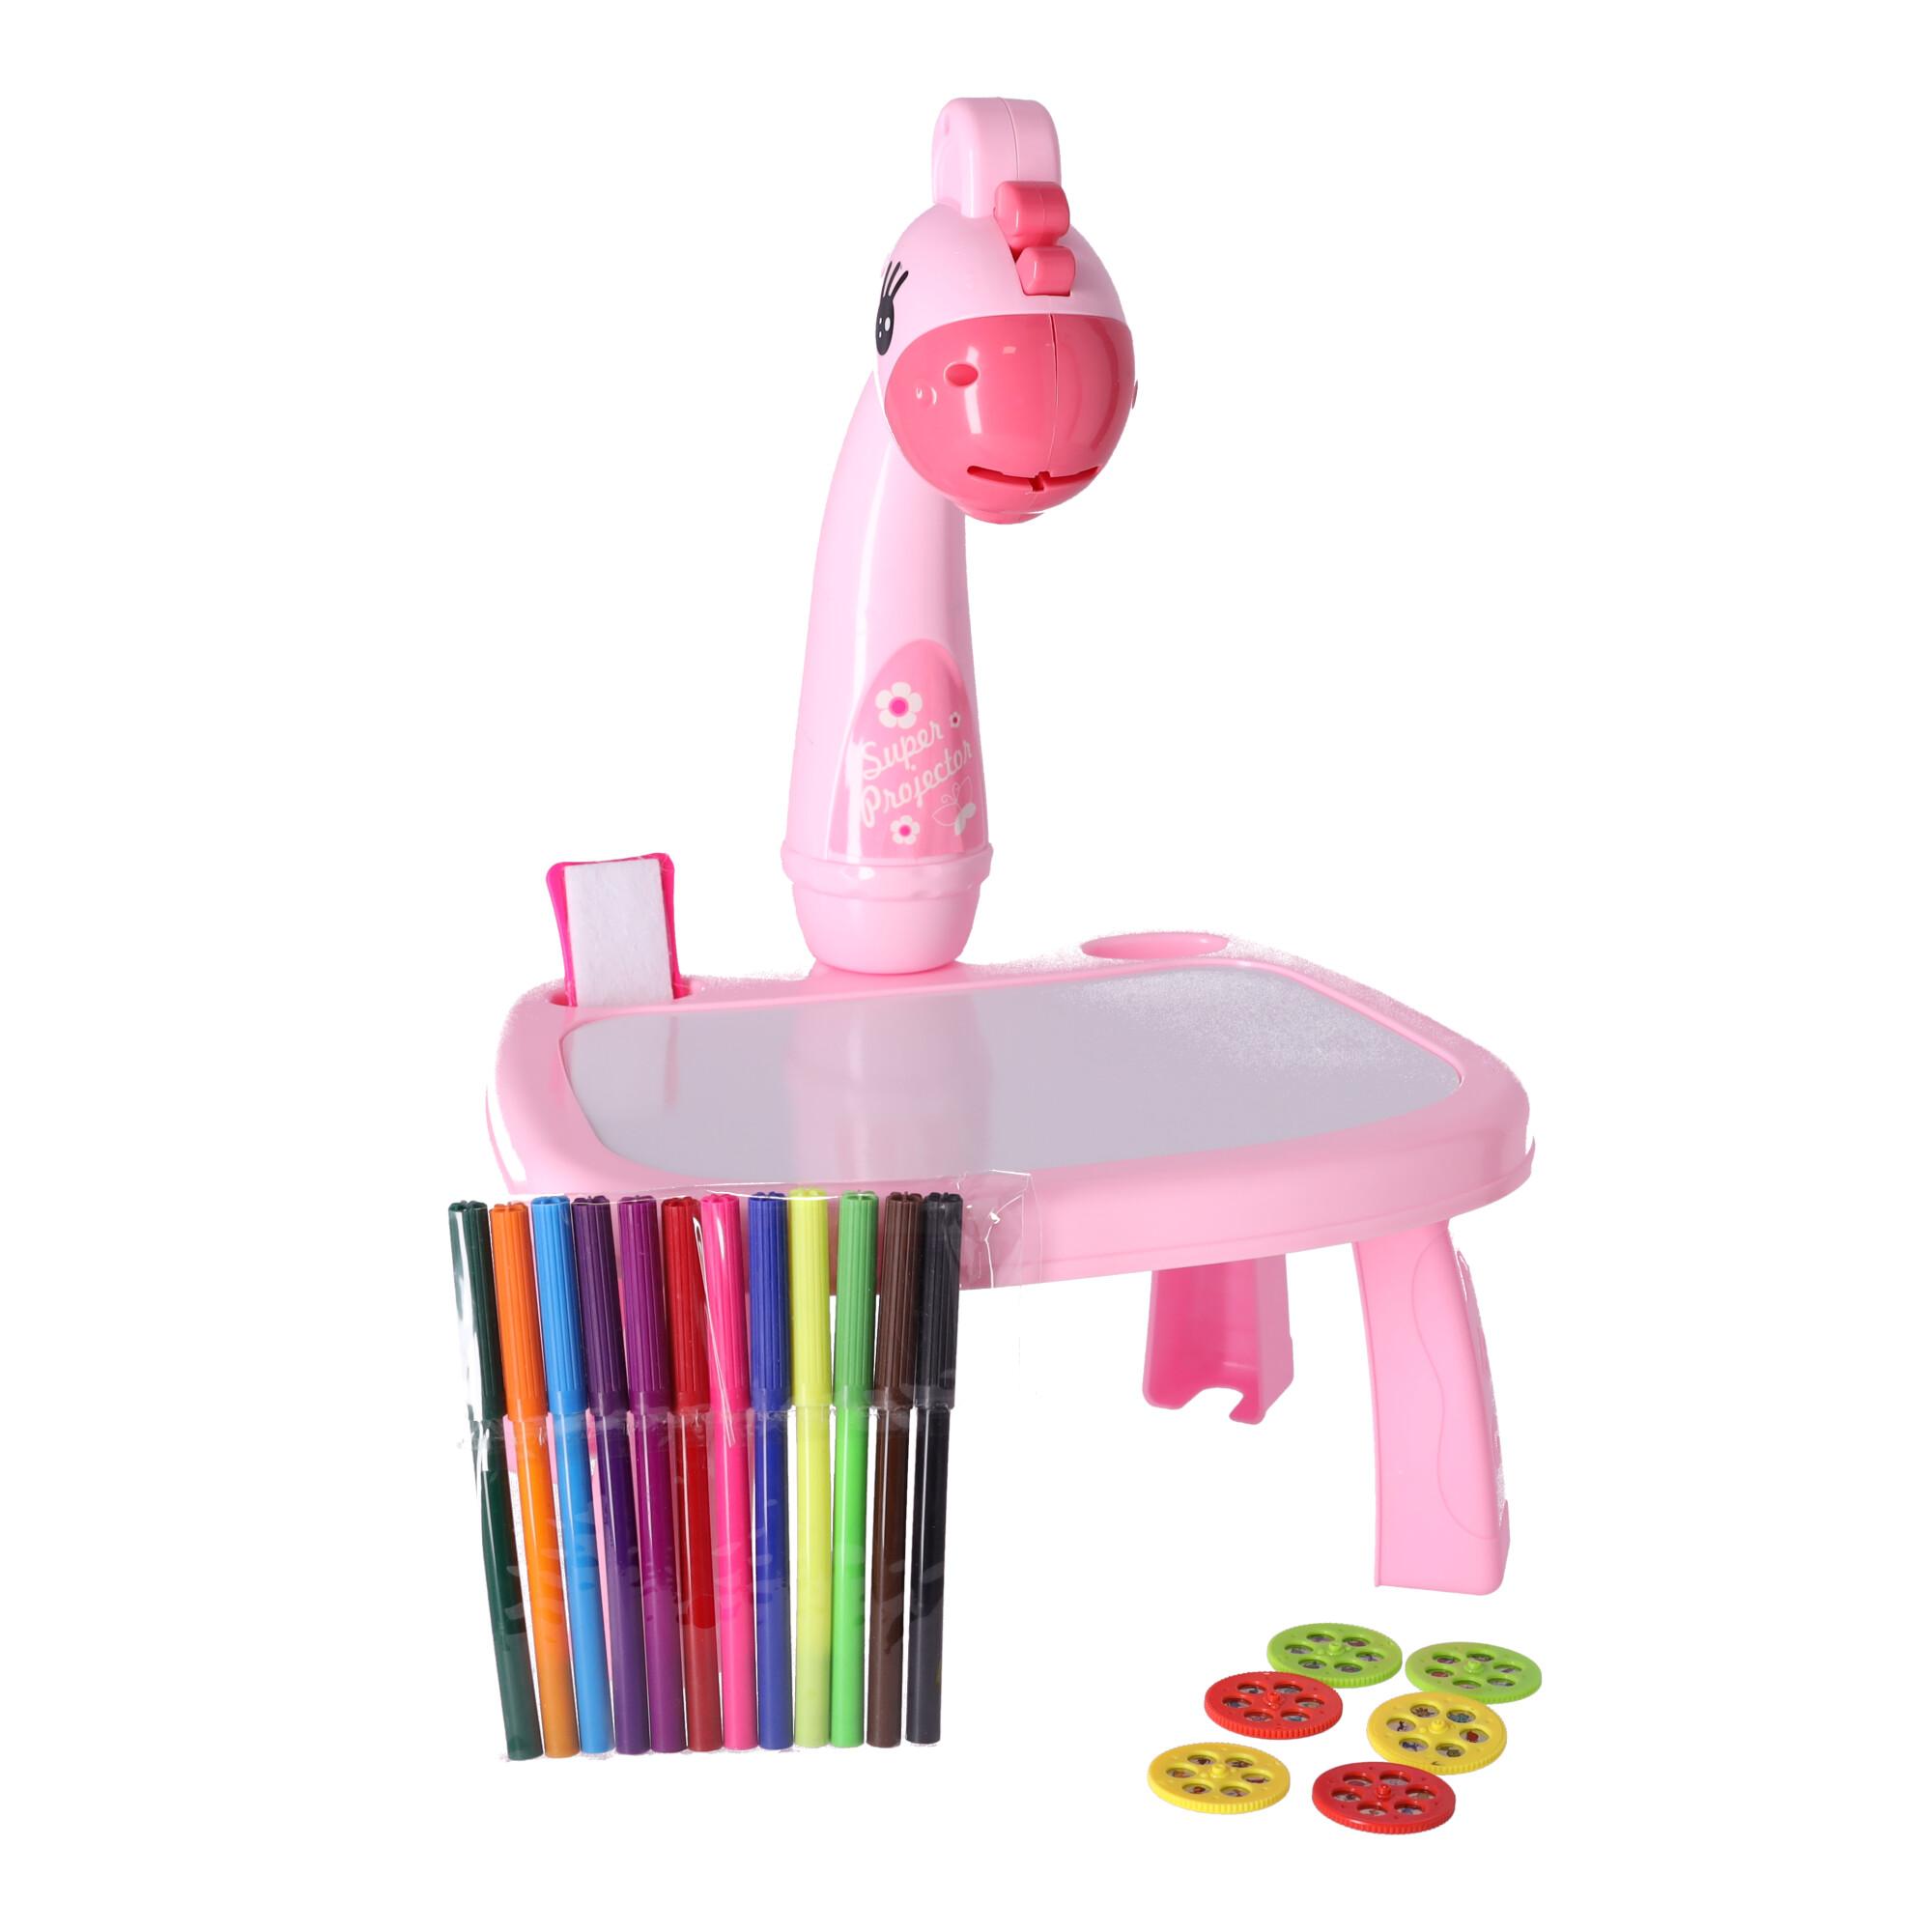 Multifunctional projector / projector for learning to draw - pink giraffe